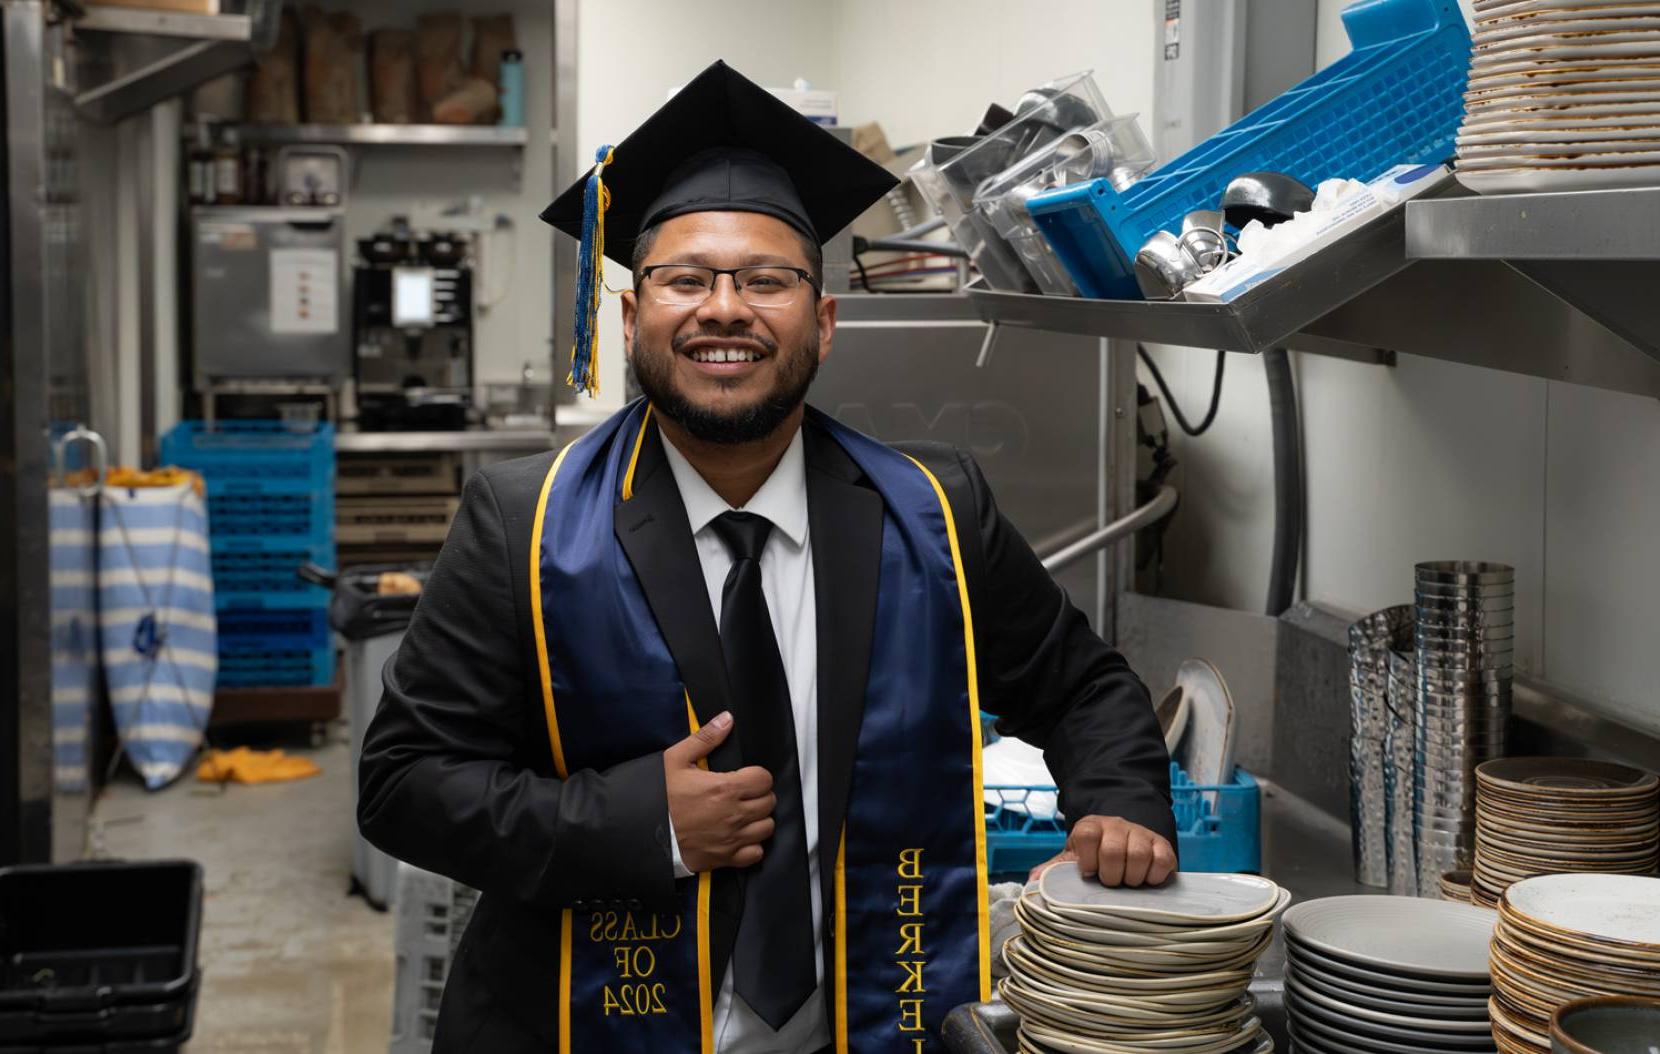 A man with a beard smiles wearing his cap, gown and stole in a commercial kitchen